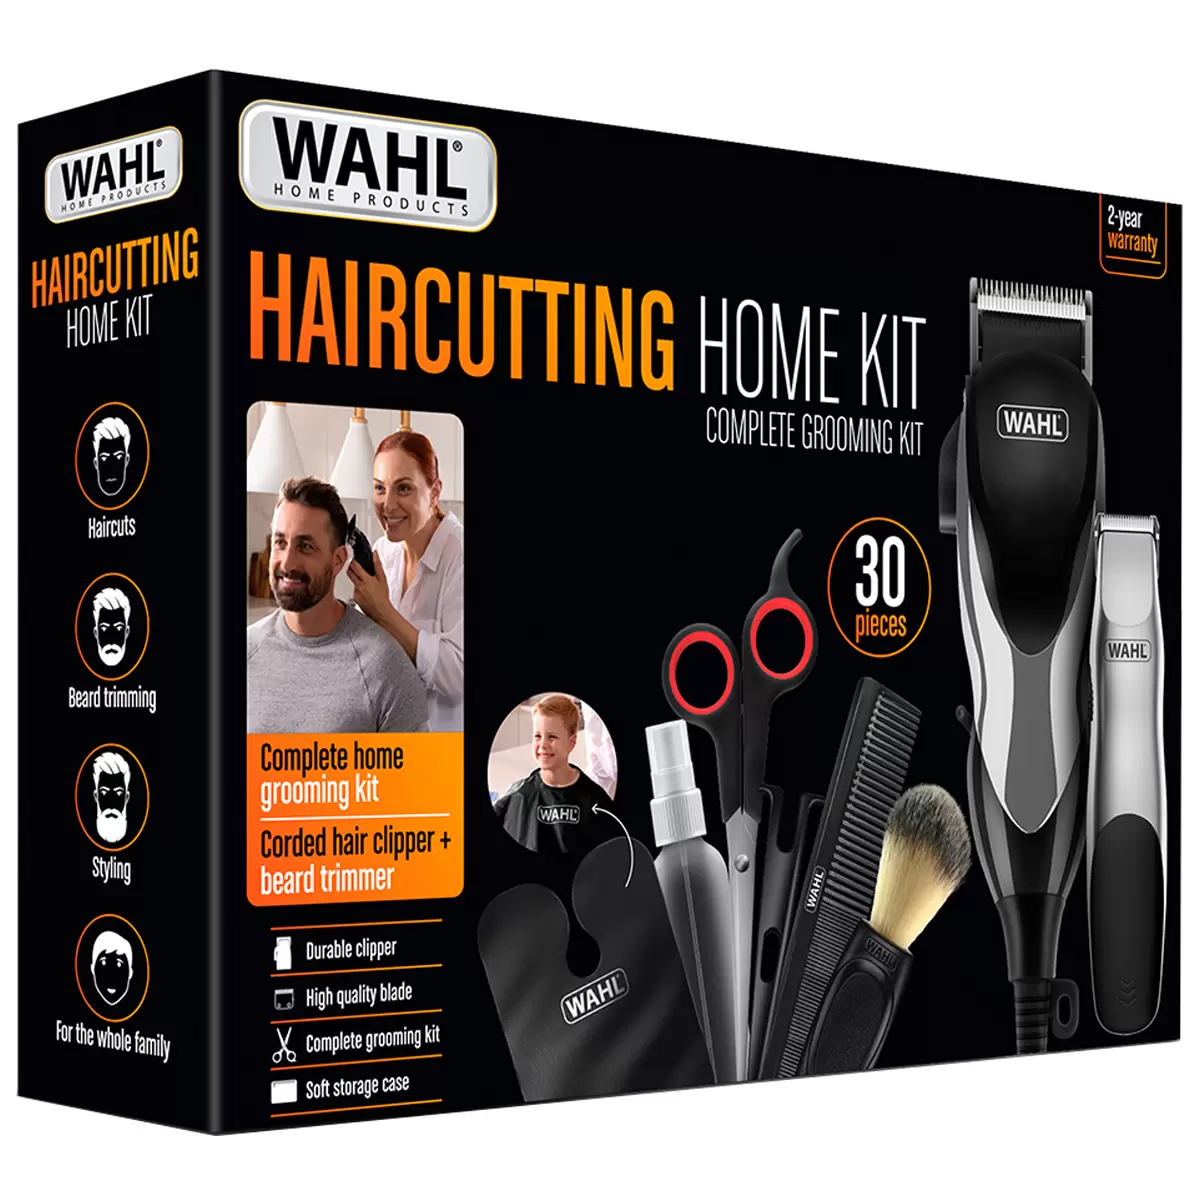 Wahl Haircutting Home Kit 30 Pieces 3026409